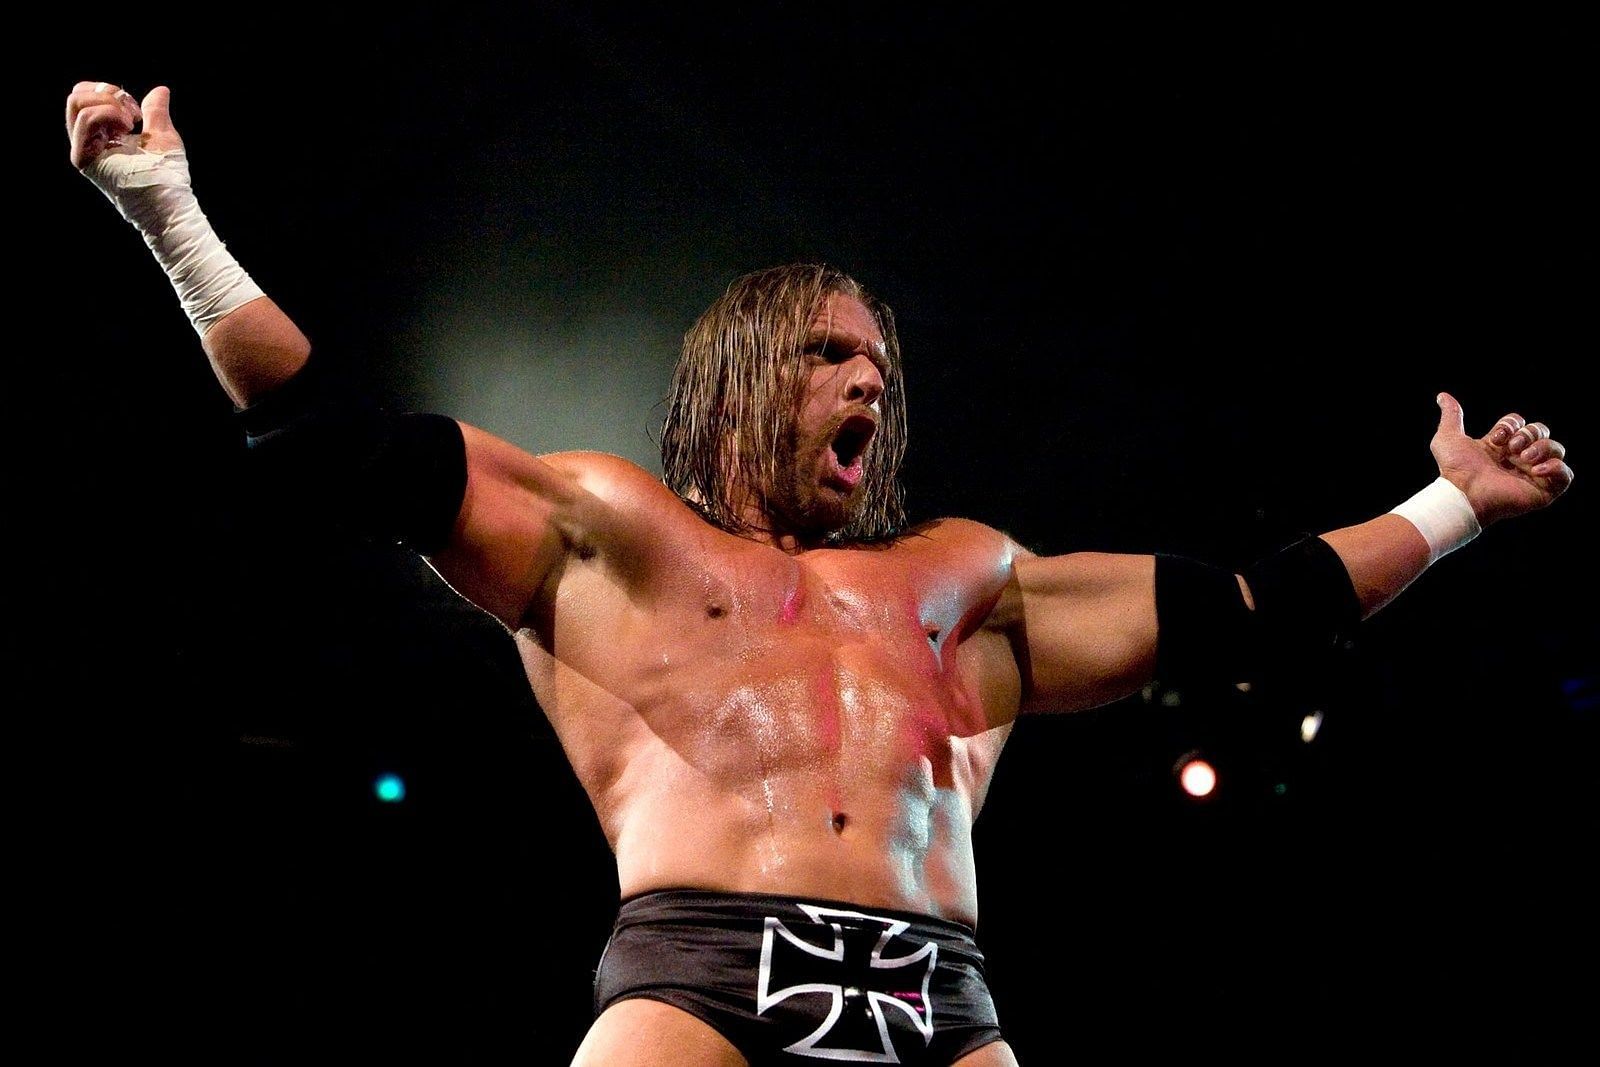 HHH helped bring success during the Attitude Era